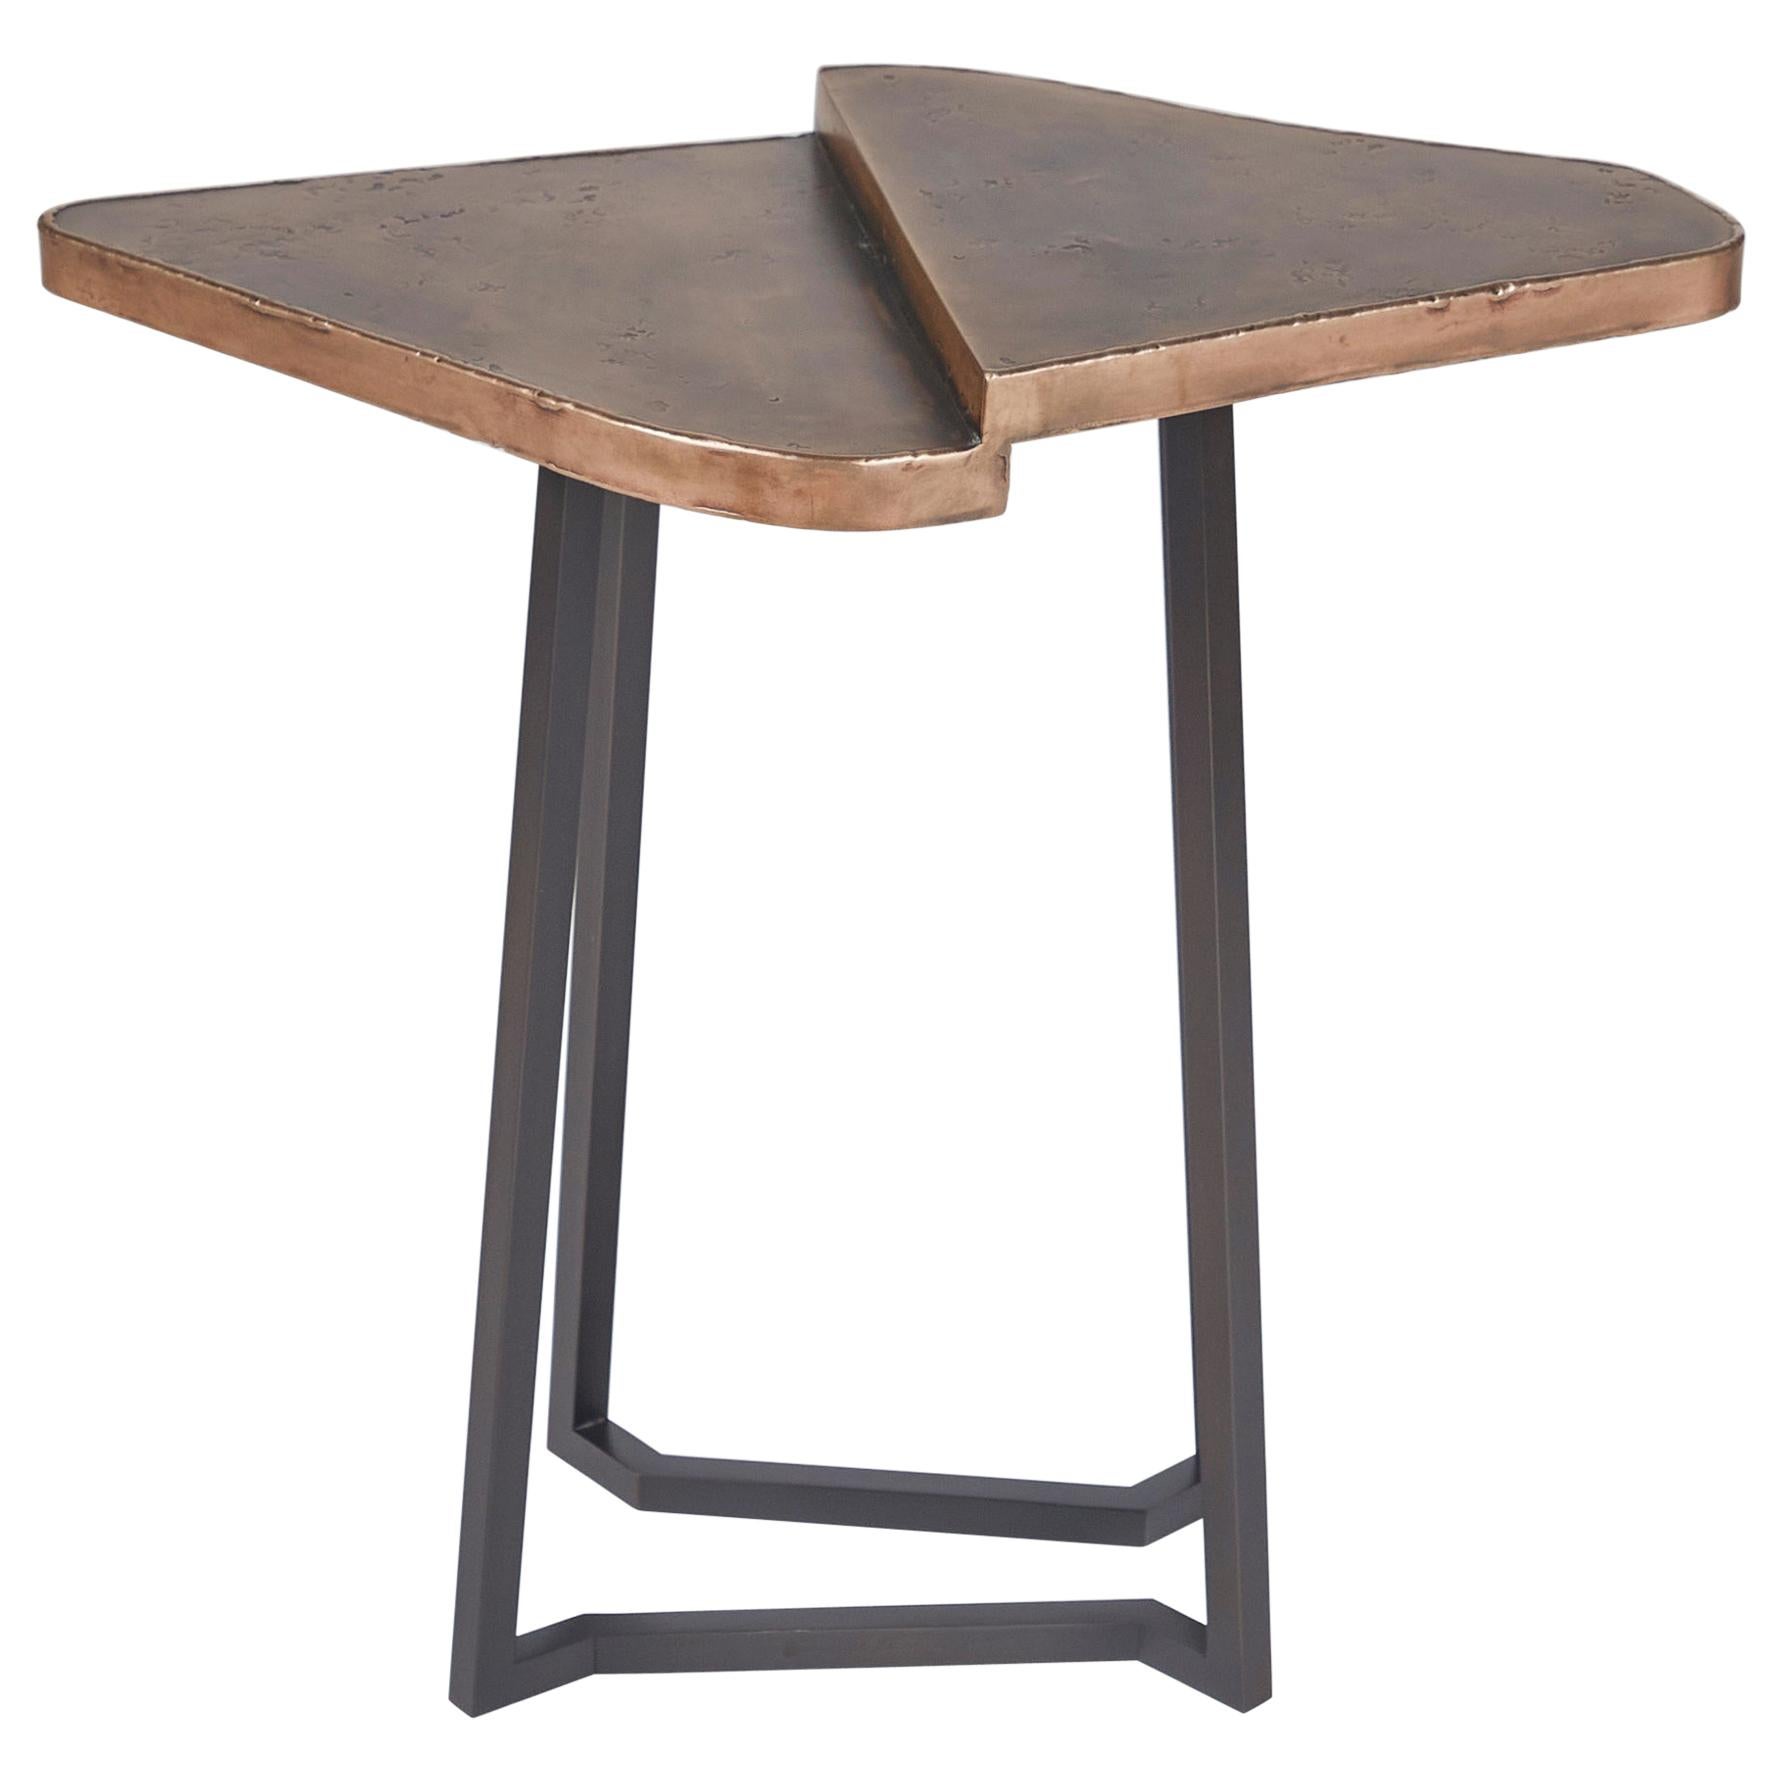 Douglas Fanning, Triangles, Two-Tiered Cocktail Table, United States, 2020 For Sale